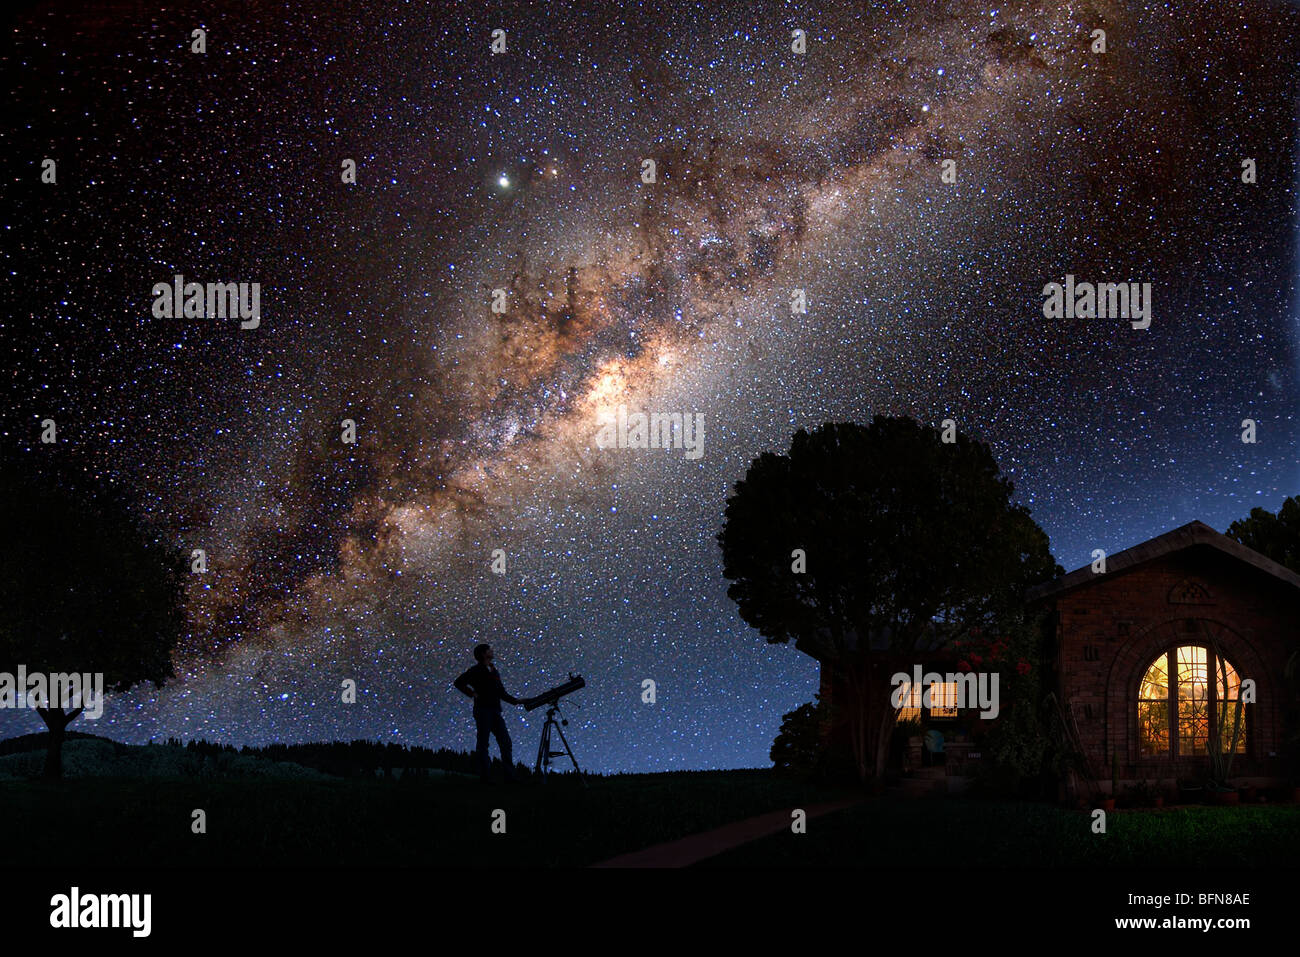 A man gazes at the Milky Way outside his house at night Stock Photo